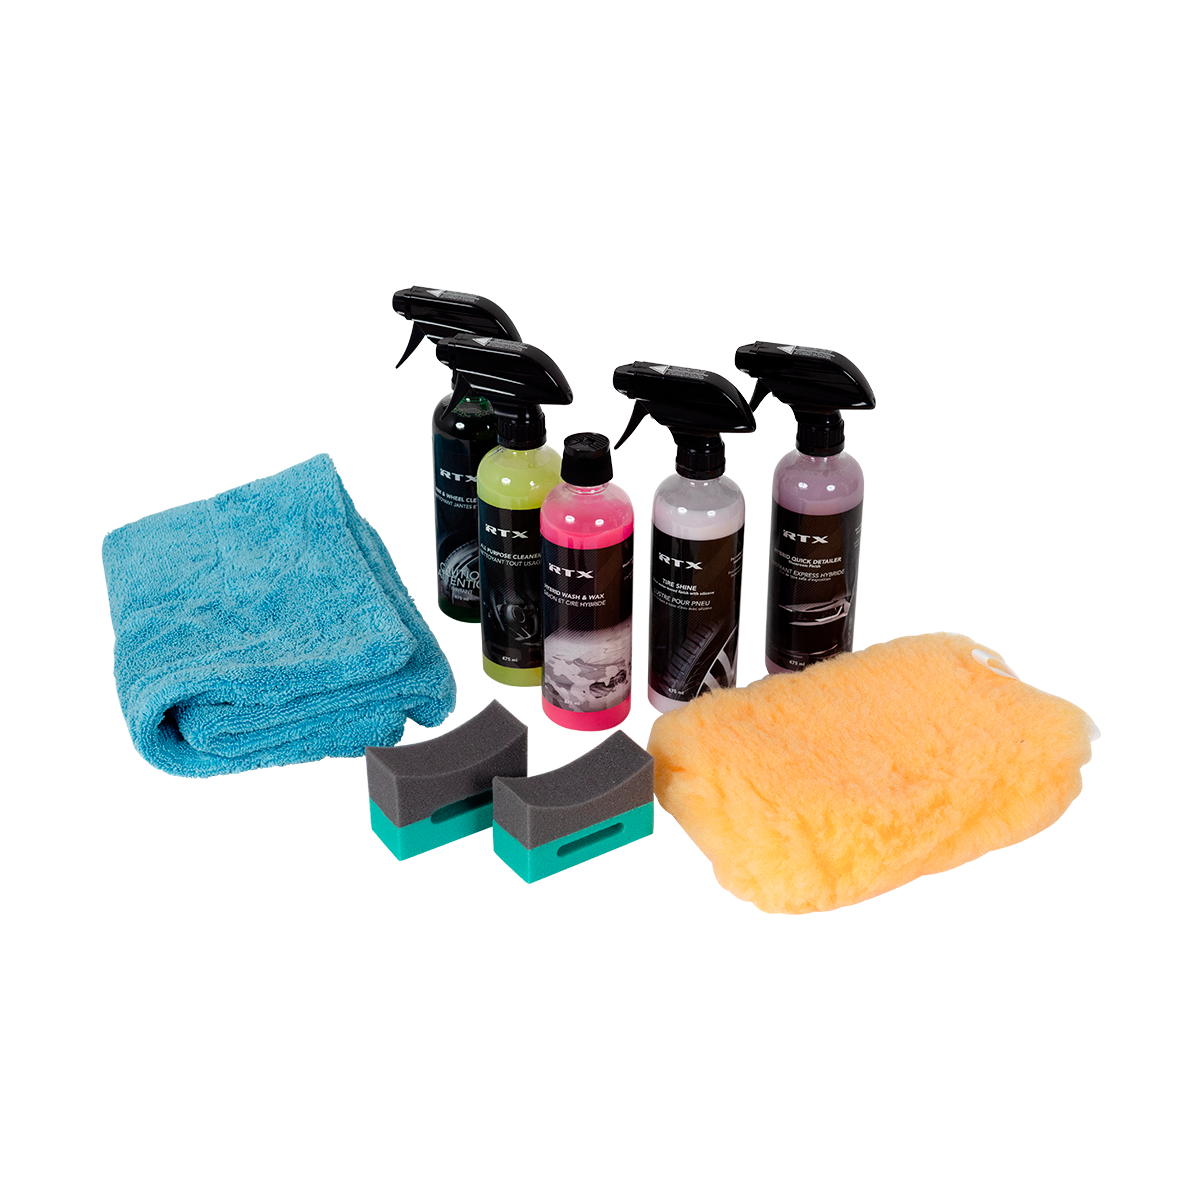 Complete cleaner kit